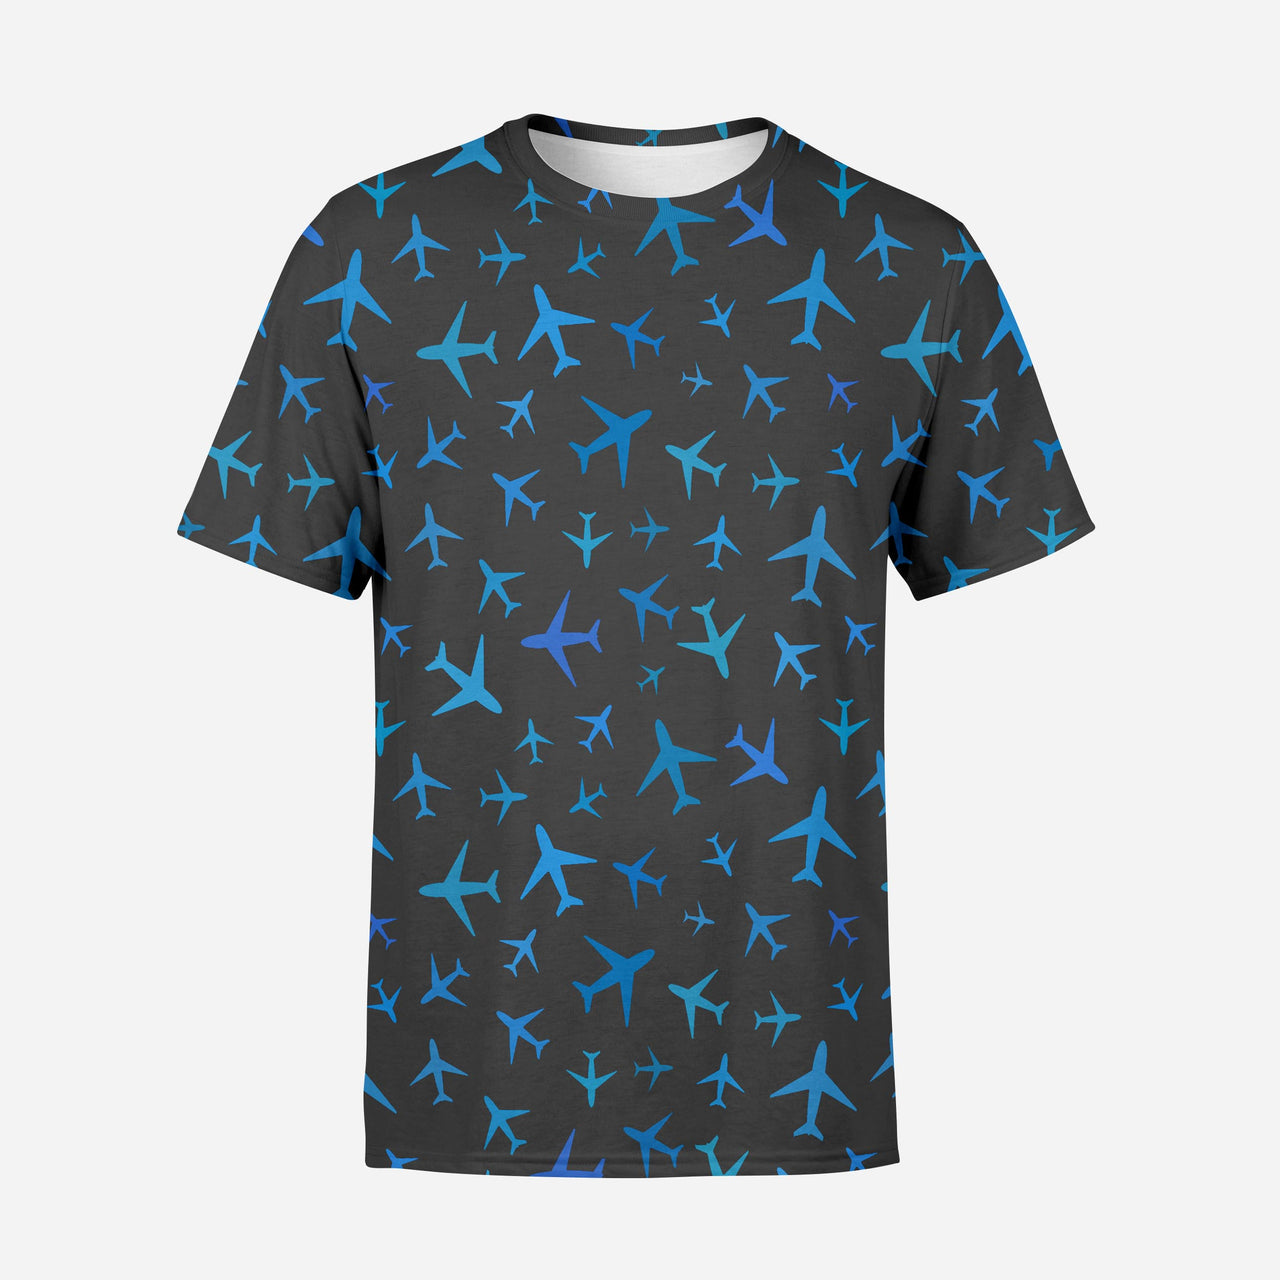 Many Airplanes (Gray) Designed 3D T-Shirts